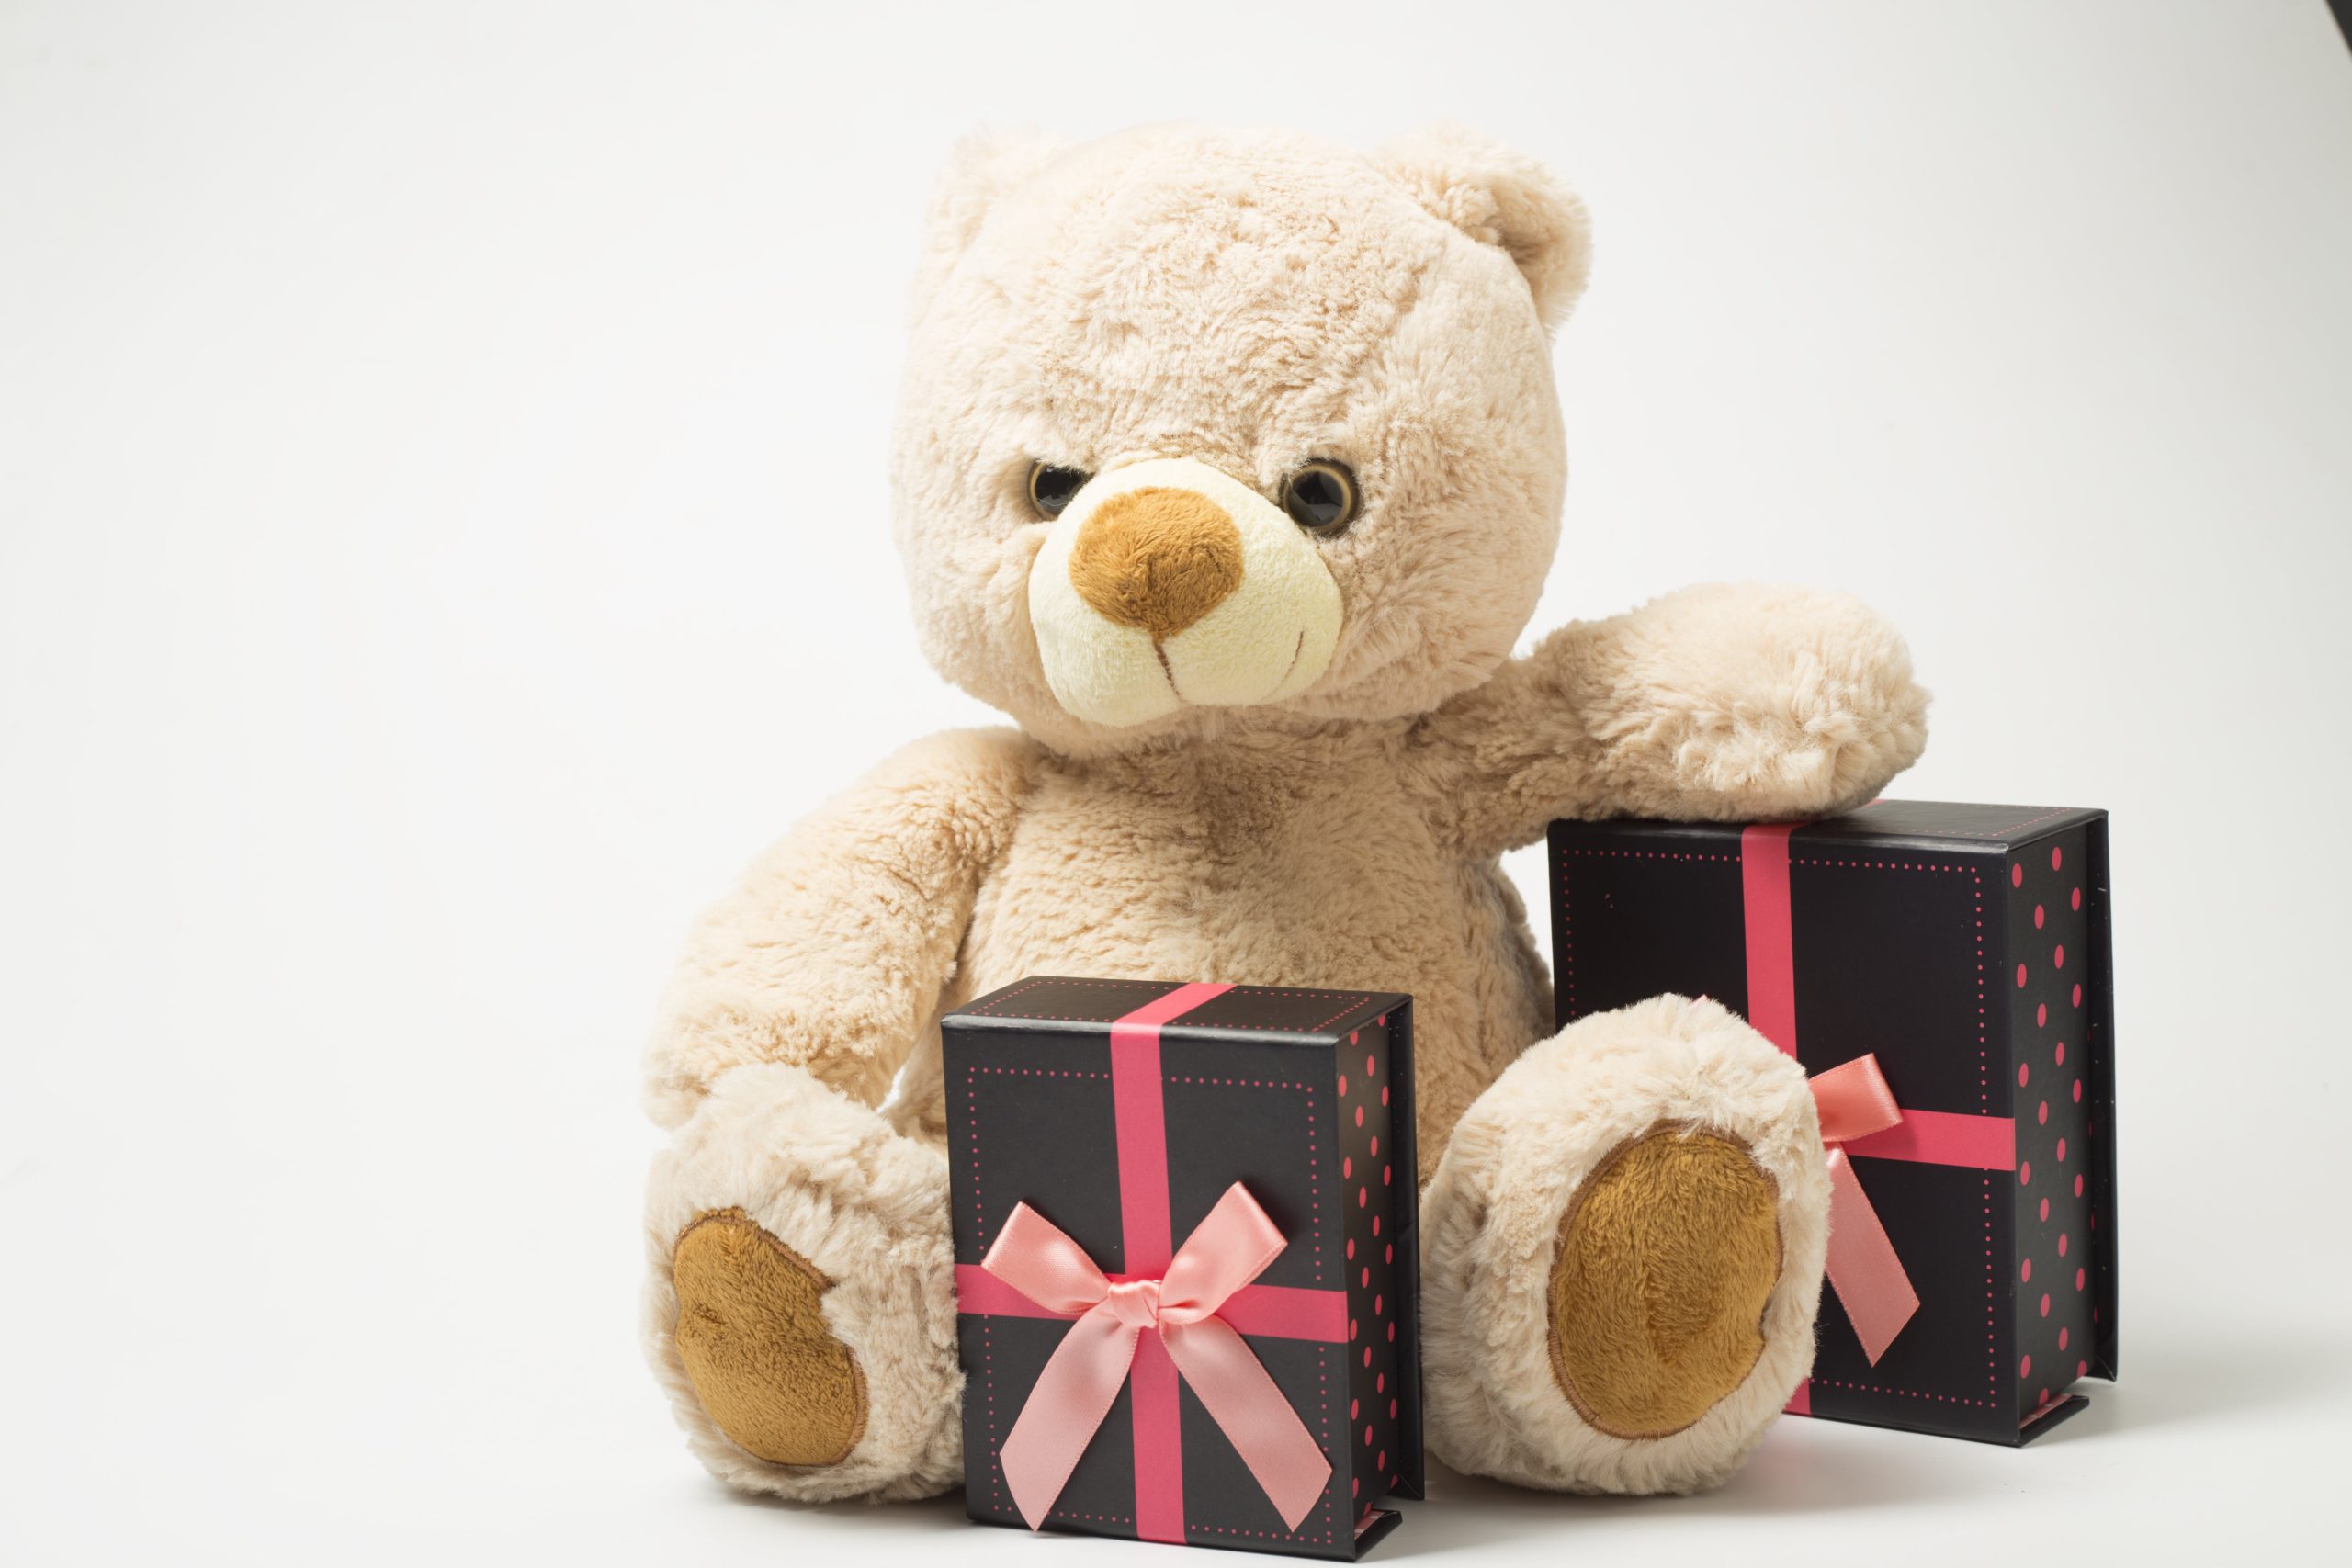 What are the Best Valentine’s Day Gifts for Children?